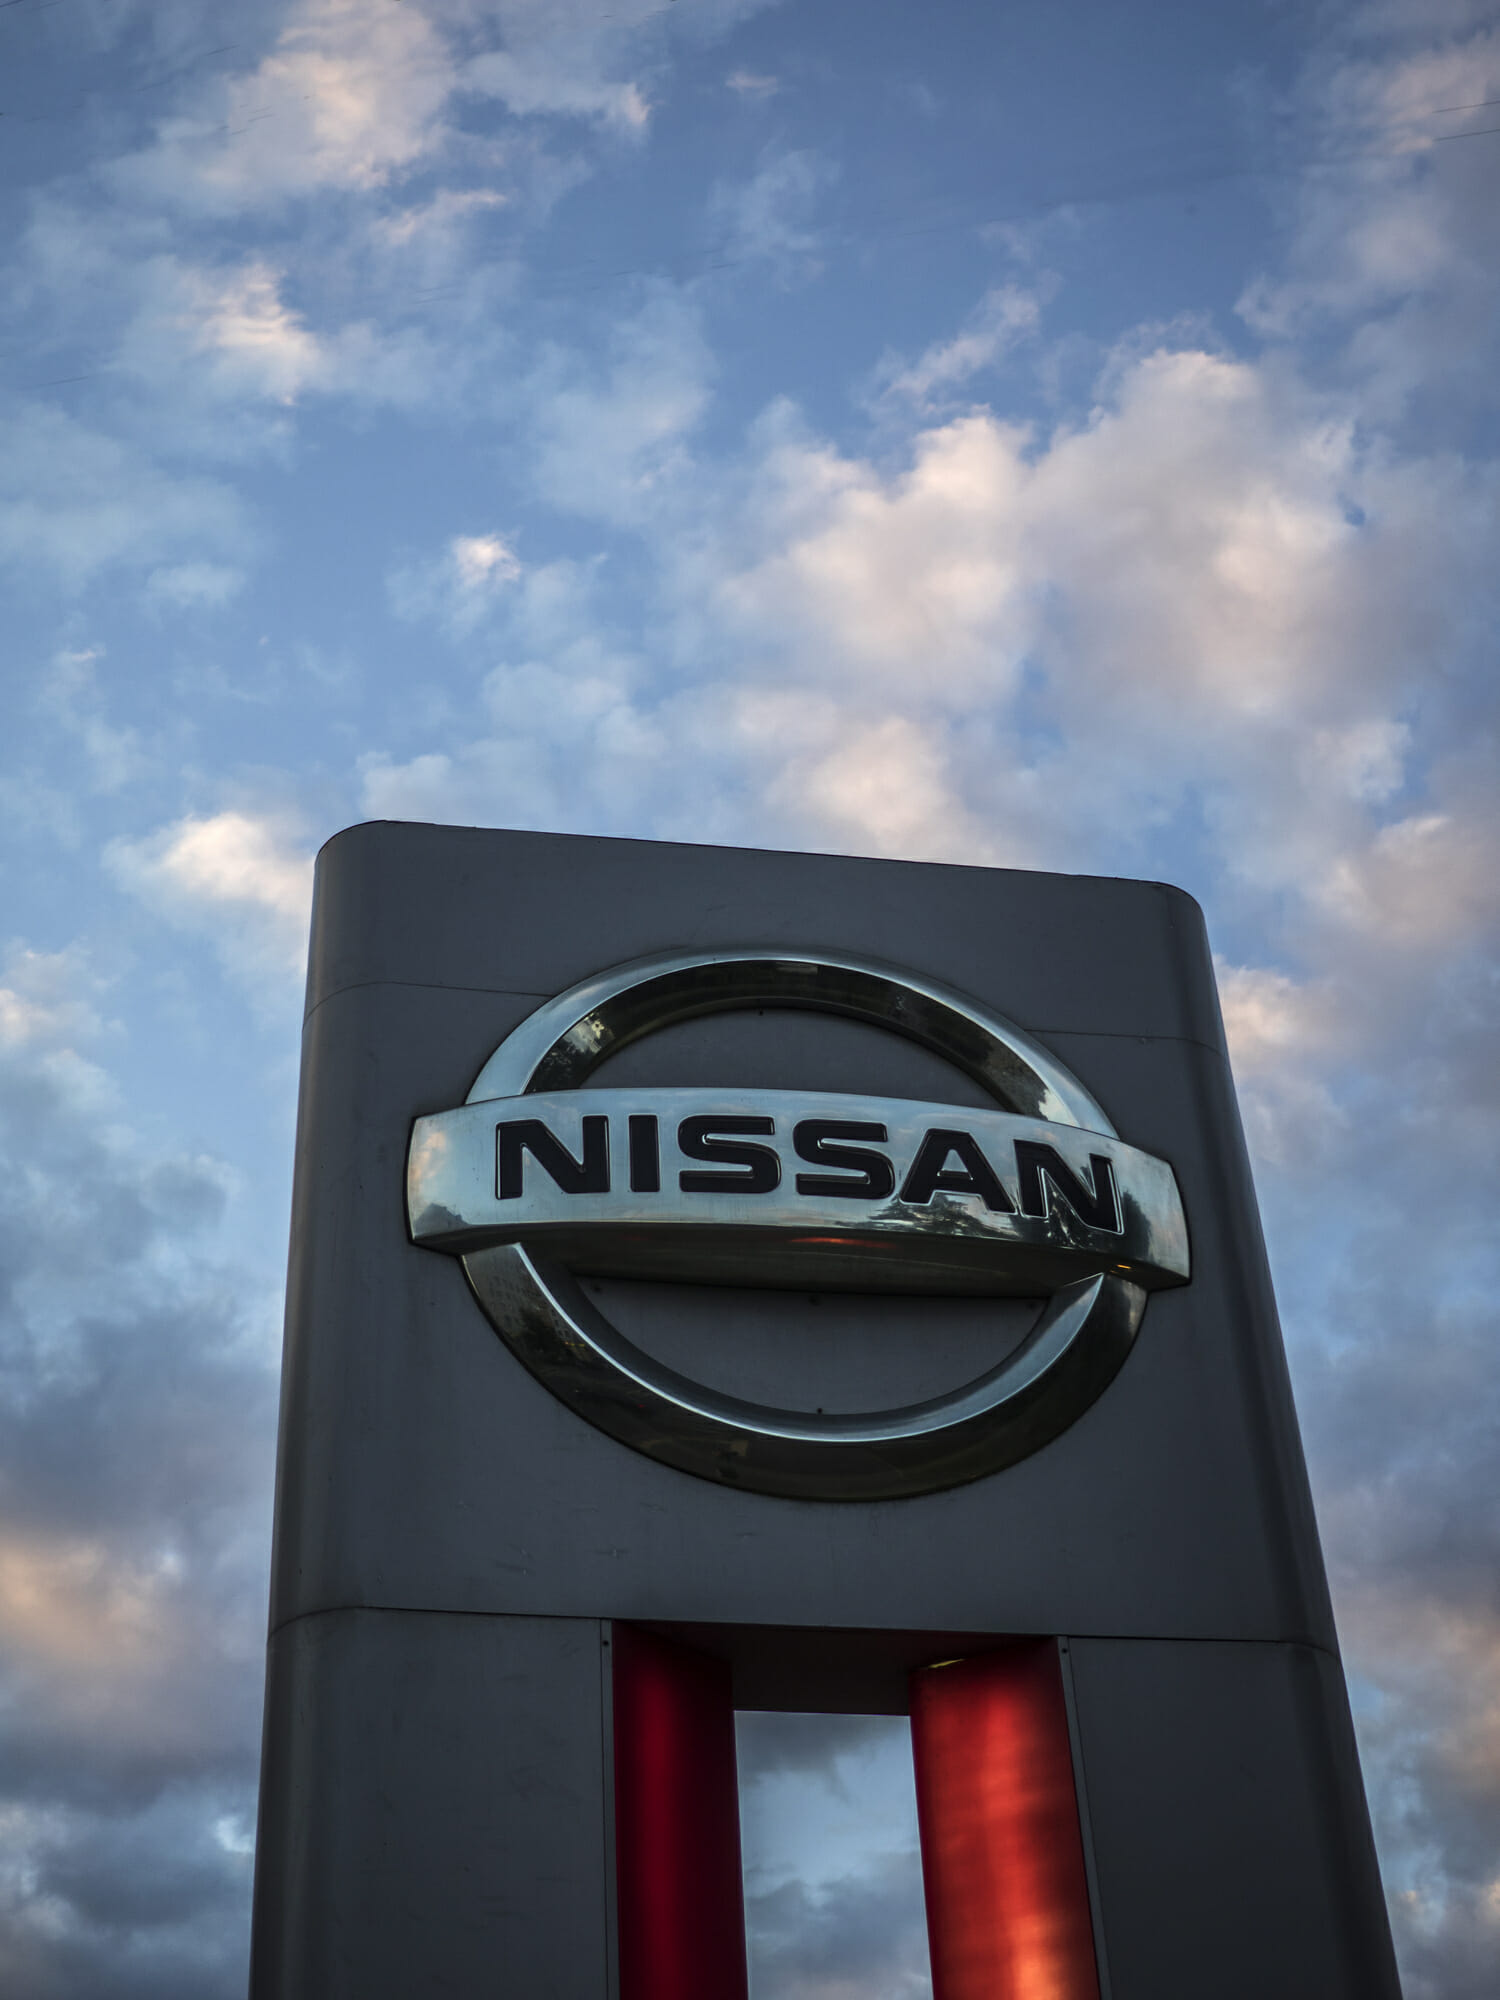 Nissan Key Fob Battery: Everything You Need to Know